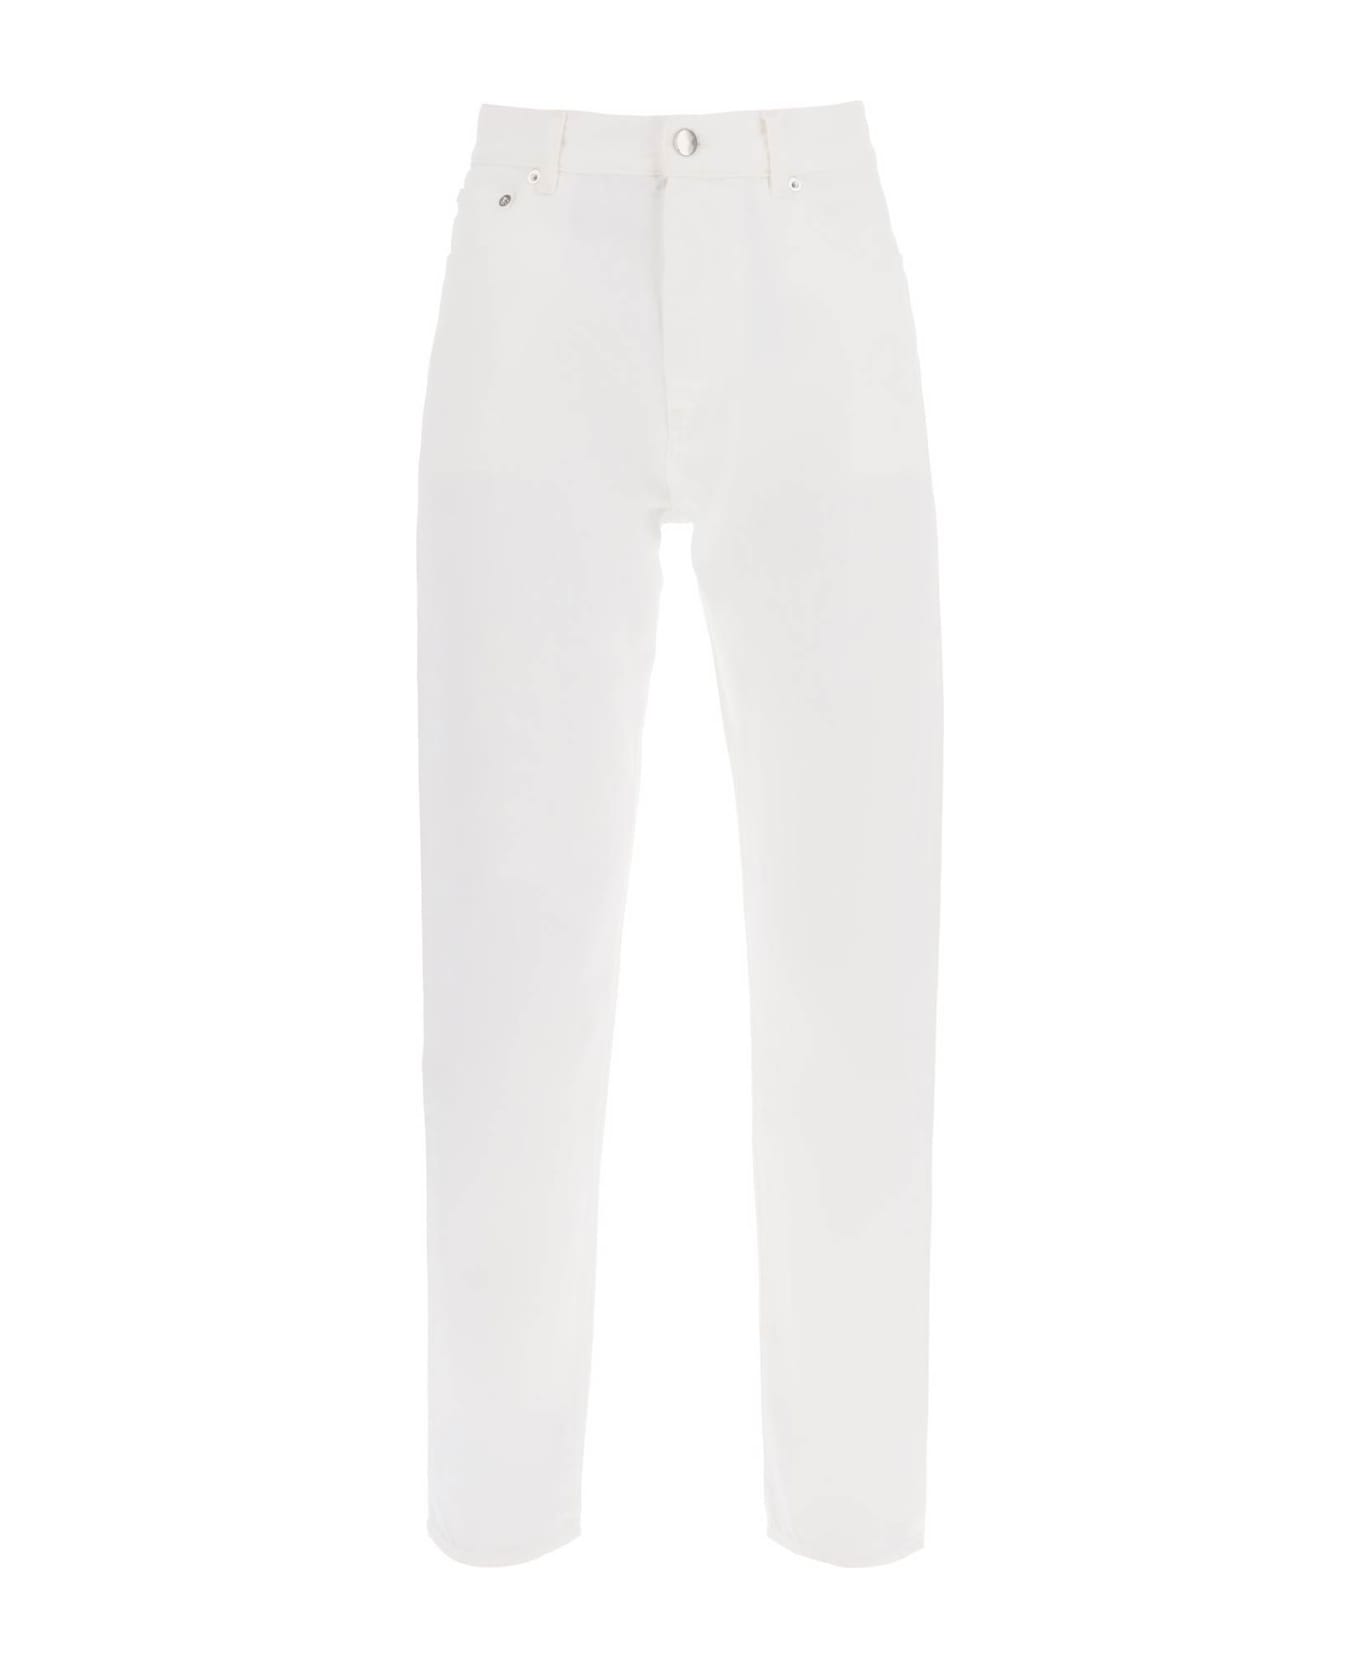 Loulou Studio Cropped Straight Cut Jeans - Ivory